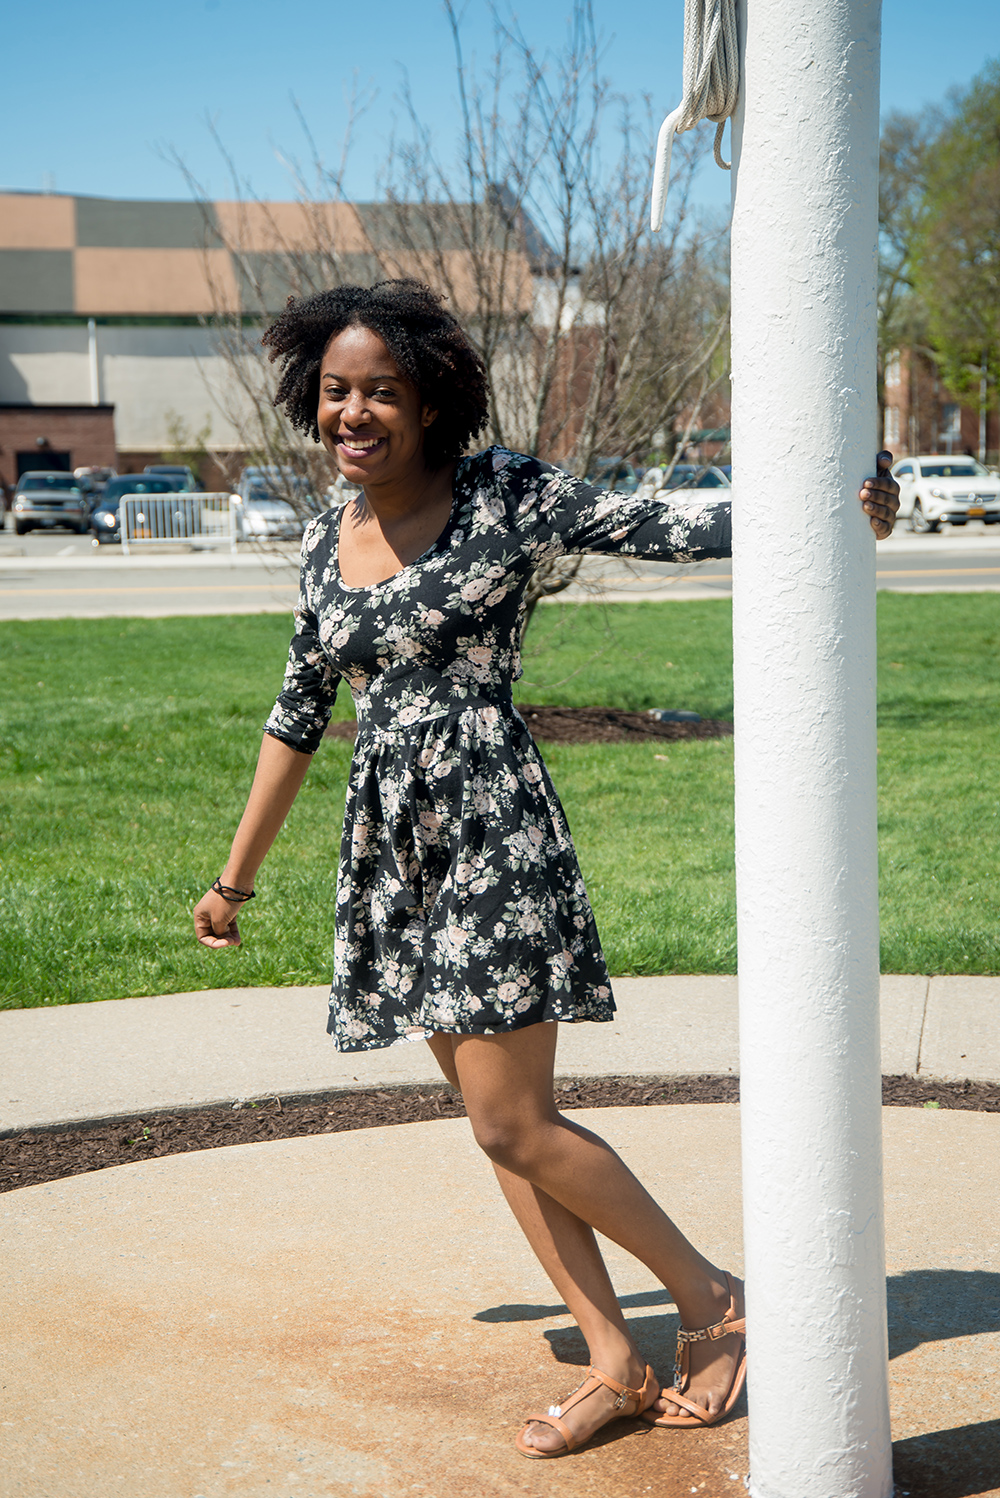 Student standing on campus smiling